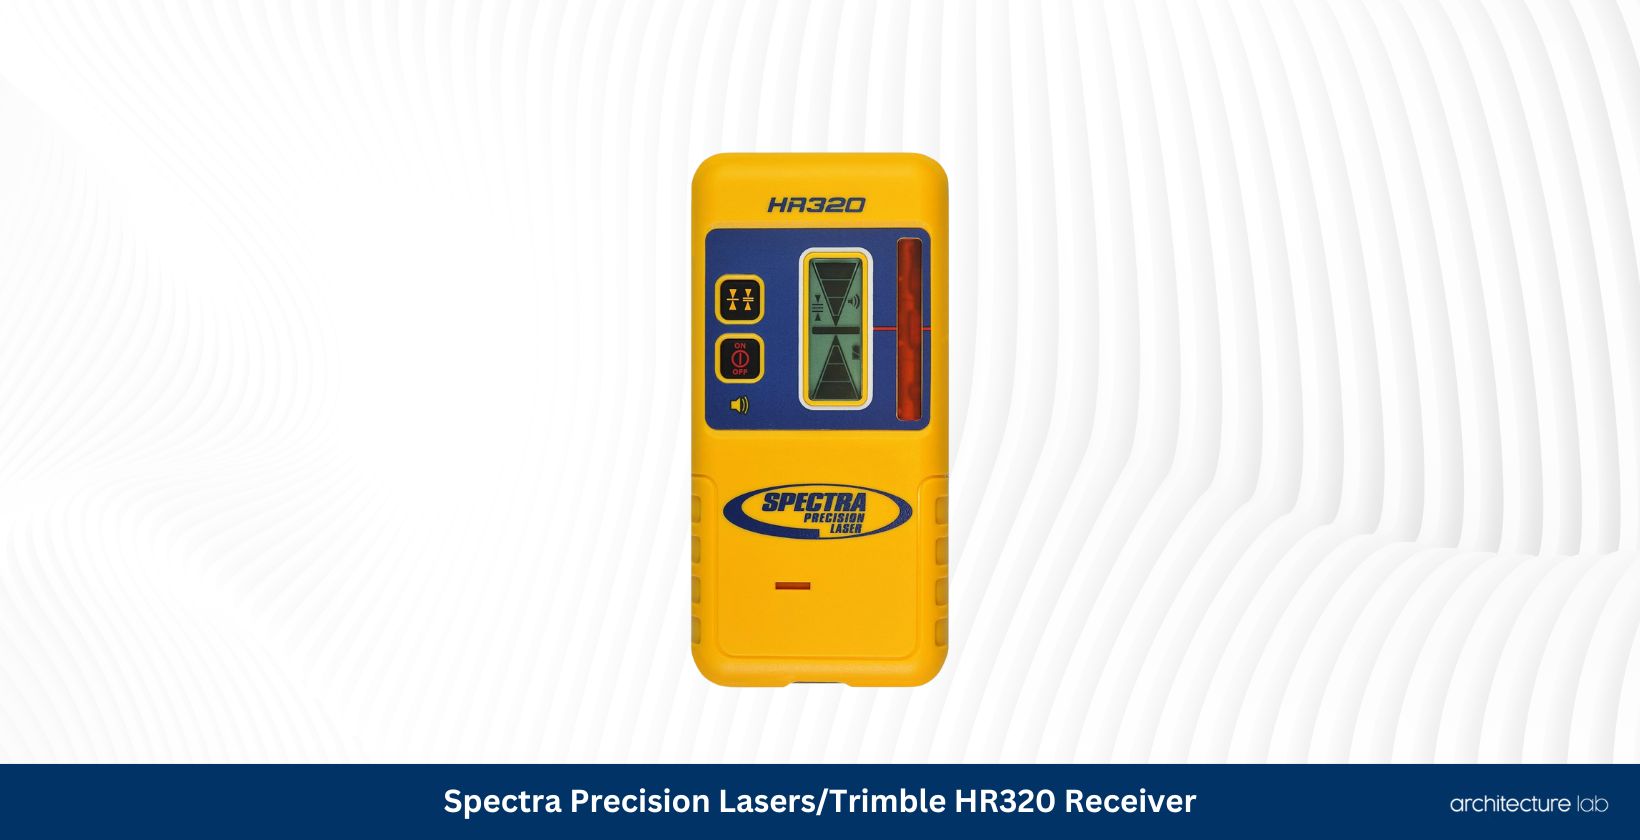 Spectra precision lasers hr320